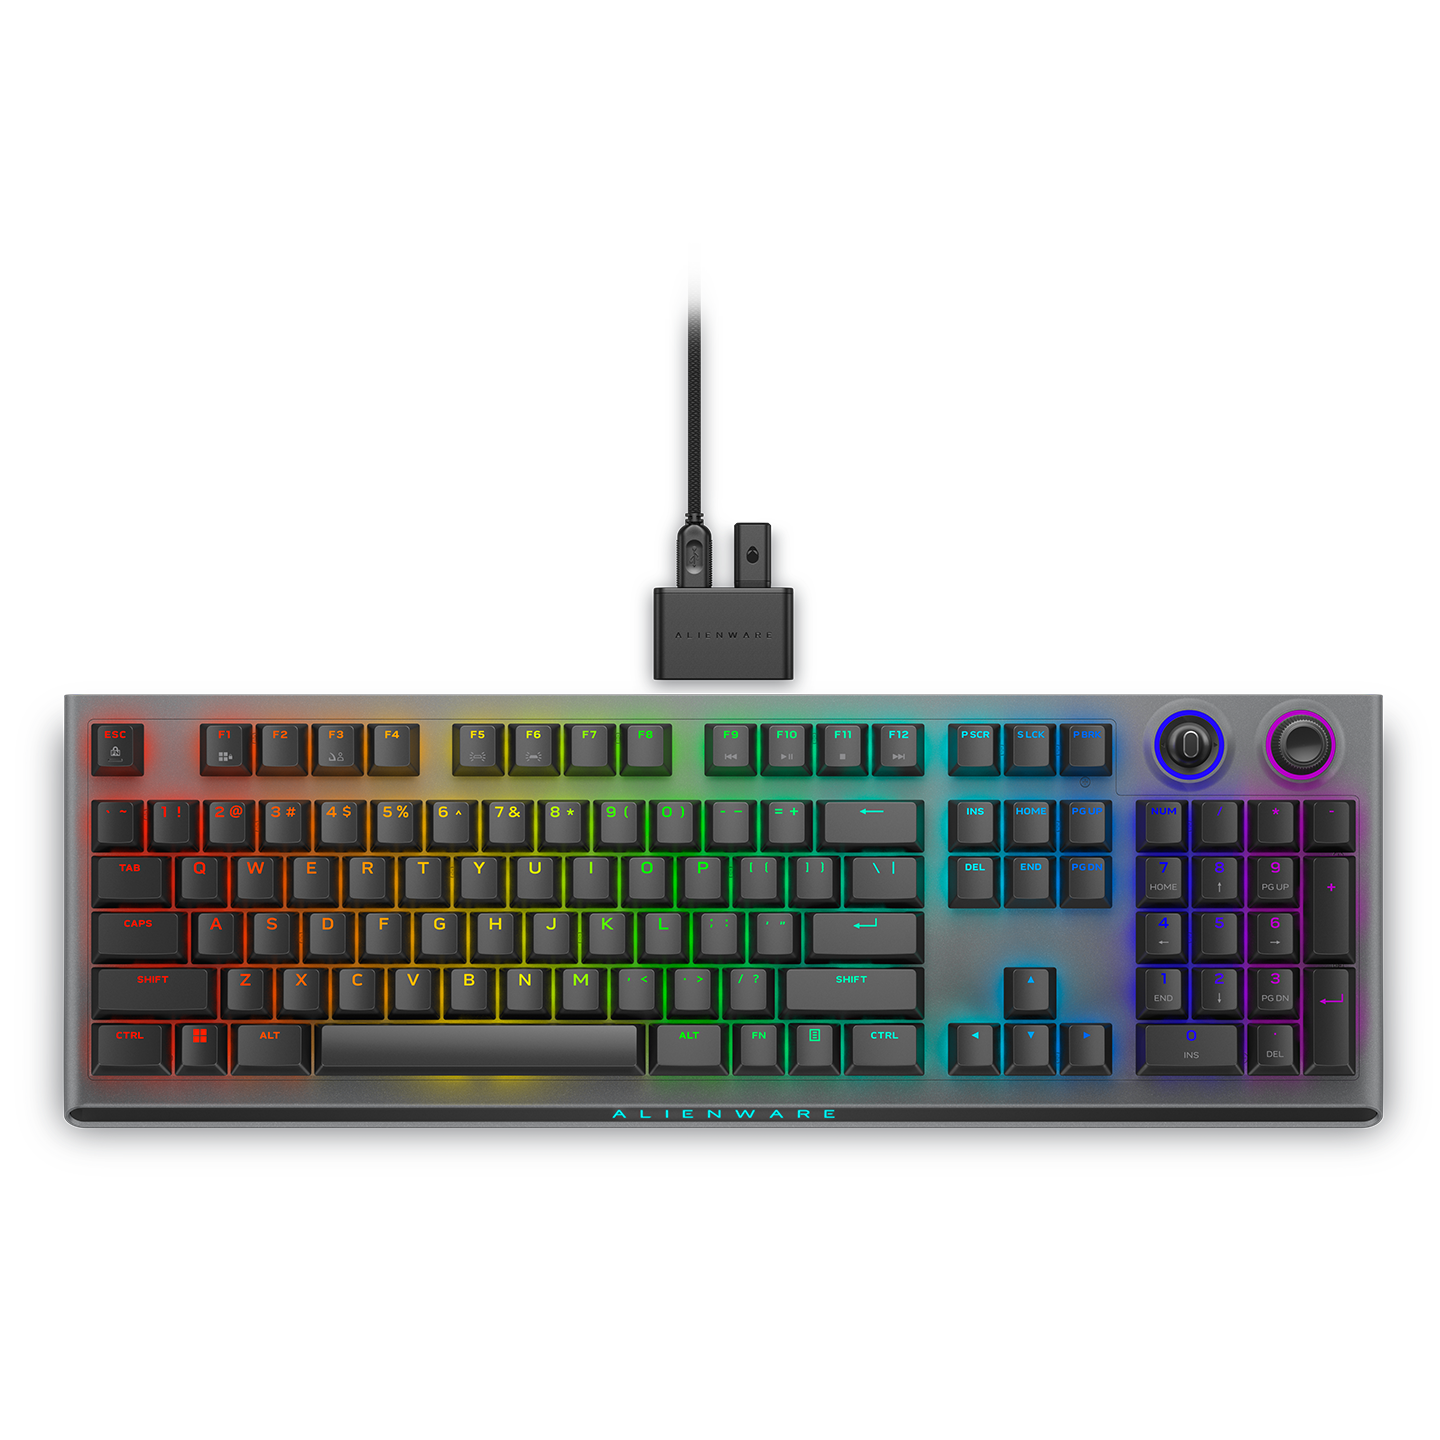 prod-449652-accessories-keyboard-alienware-aw920k-1440x1440.png